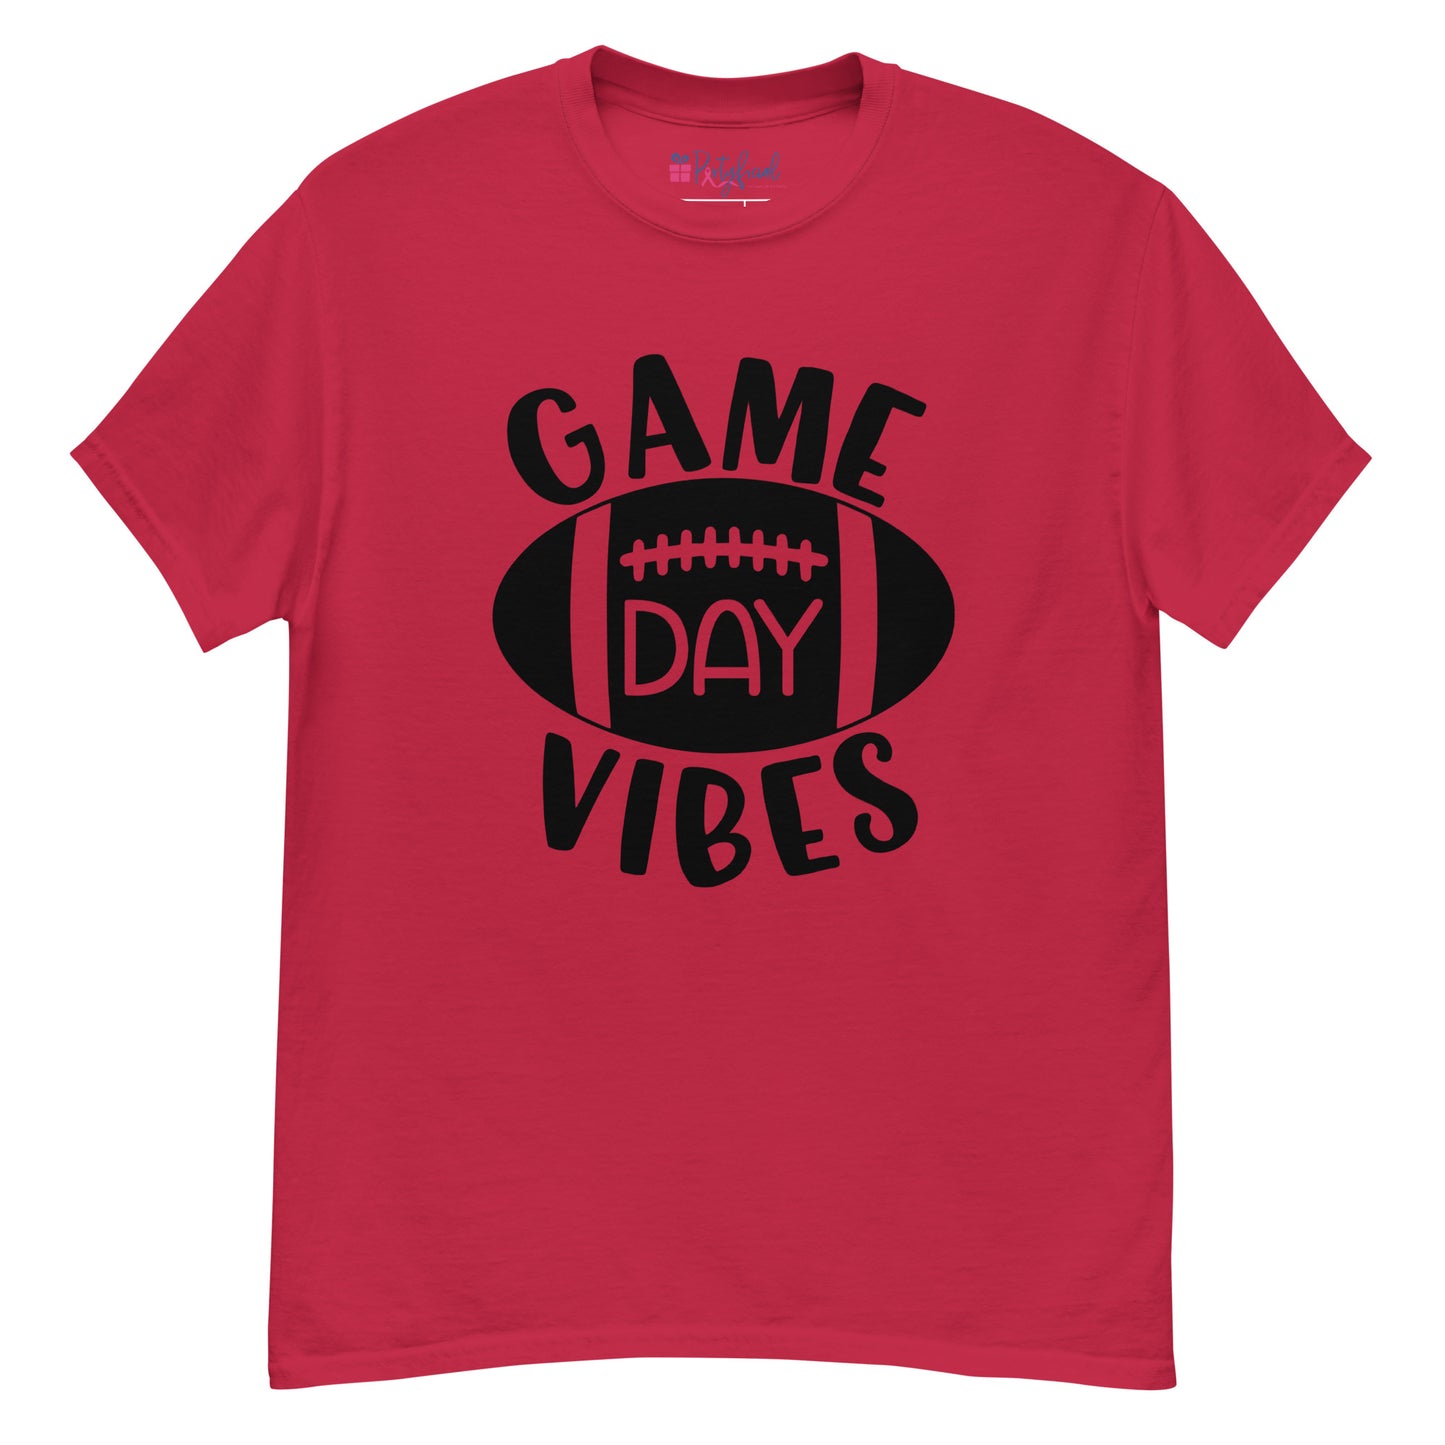 Game Day Vibes tee